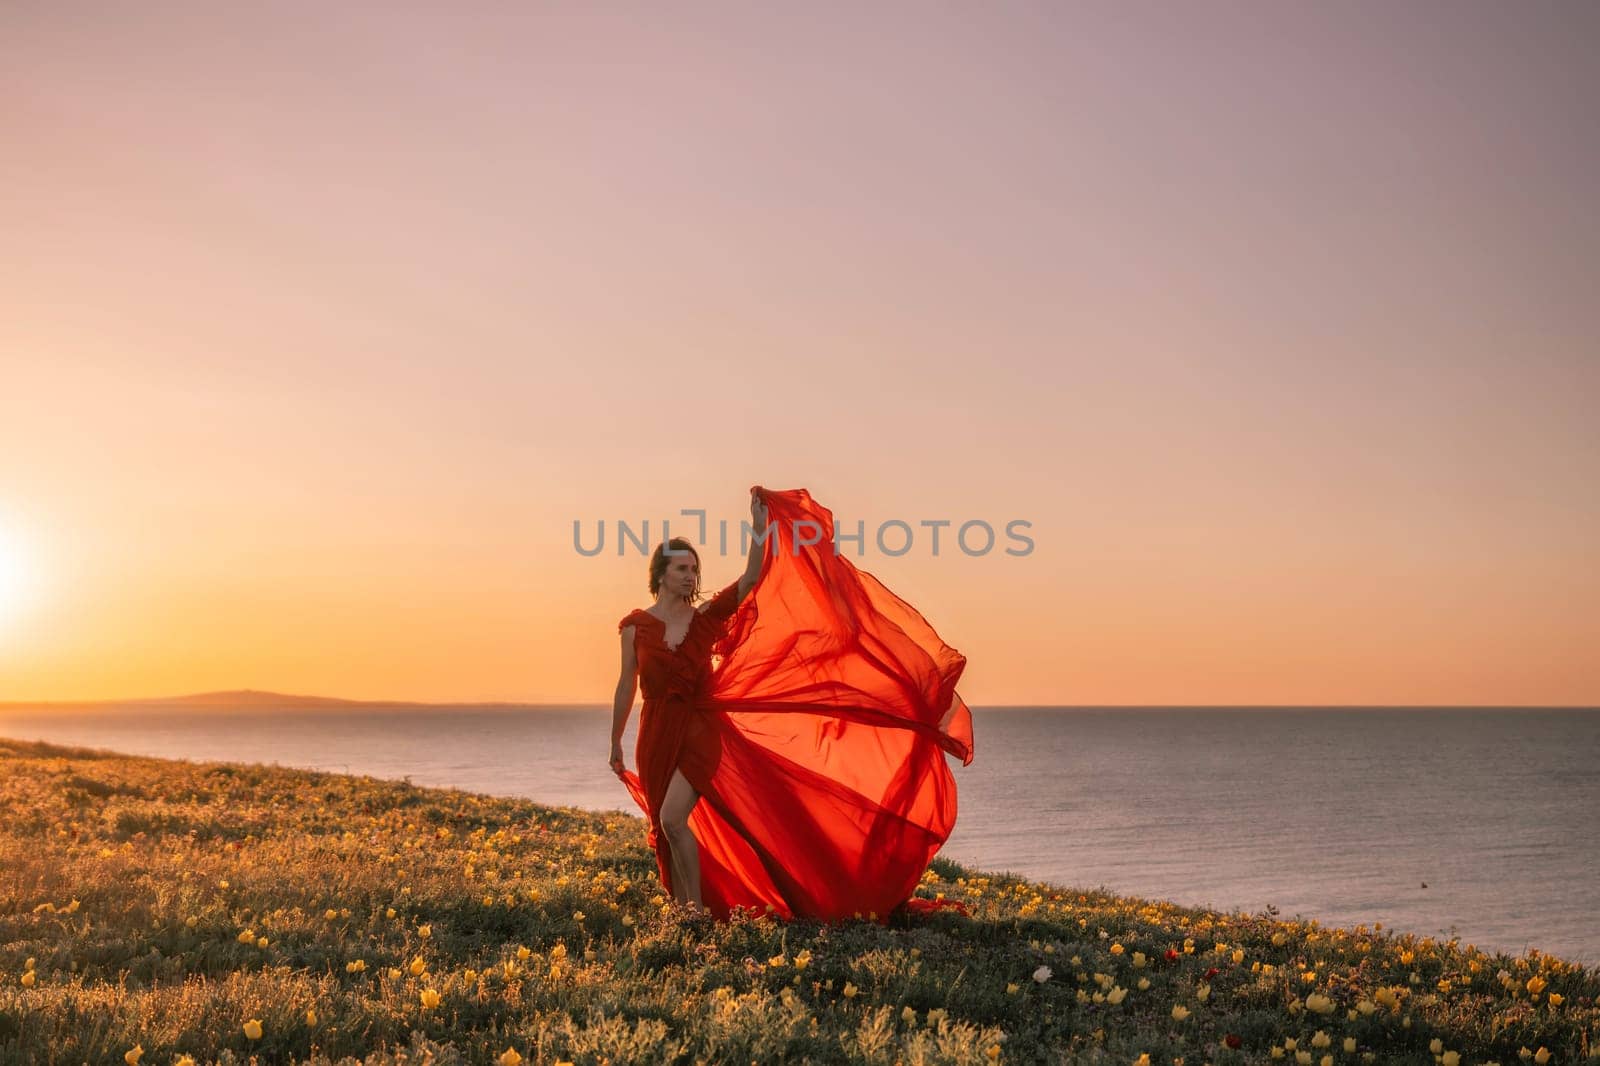 A woman in a red dress is standing on a grassy hill overlooking the ocean. The sky is a beautiful mix of orange and pink hues, creating a serene and romantic atmosphere. by Matiunina